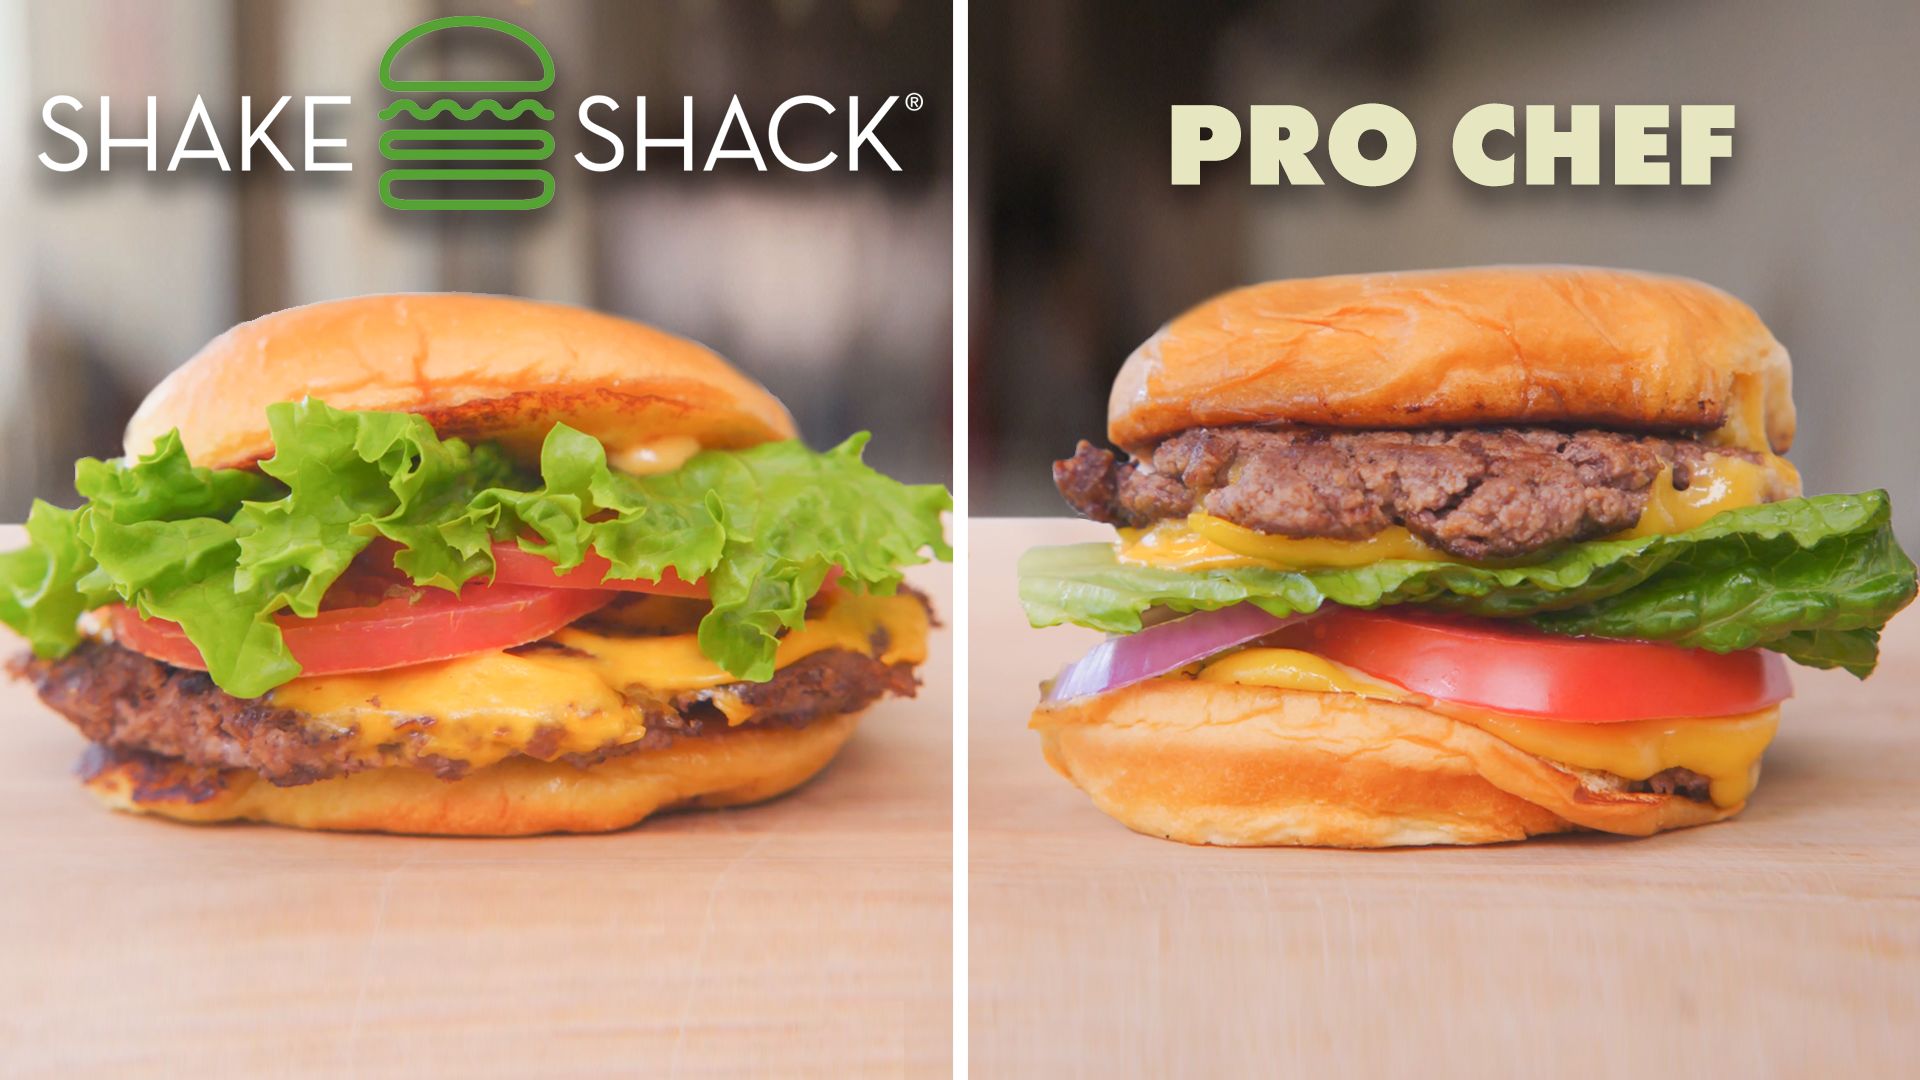 Watch Who Makes The Takeout on Appétit Bon vs Pro Food | Burger? Taking Best Fast Chef Takeout 